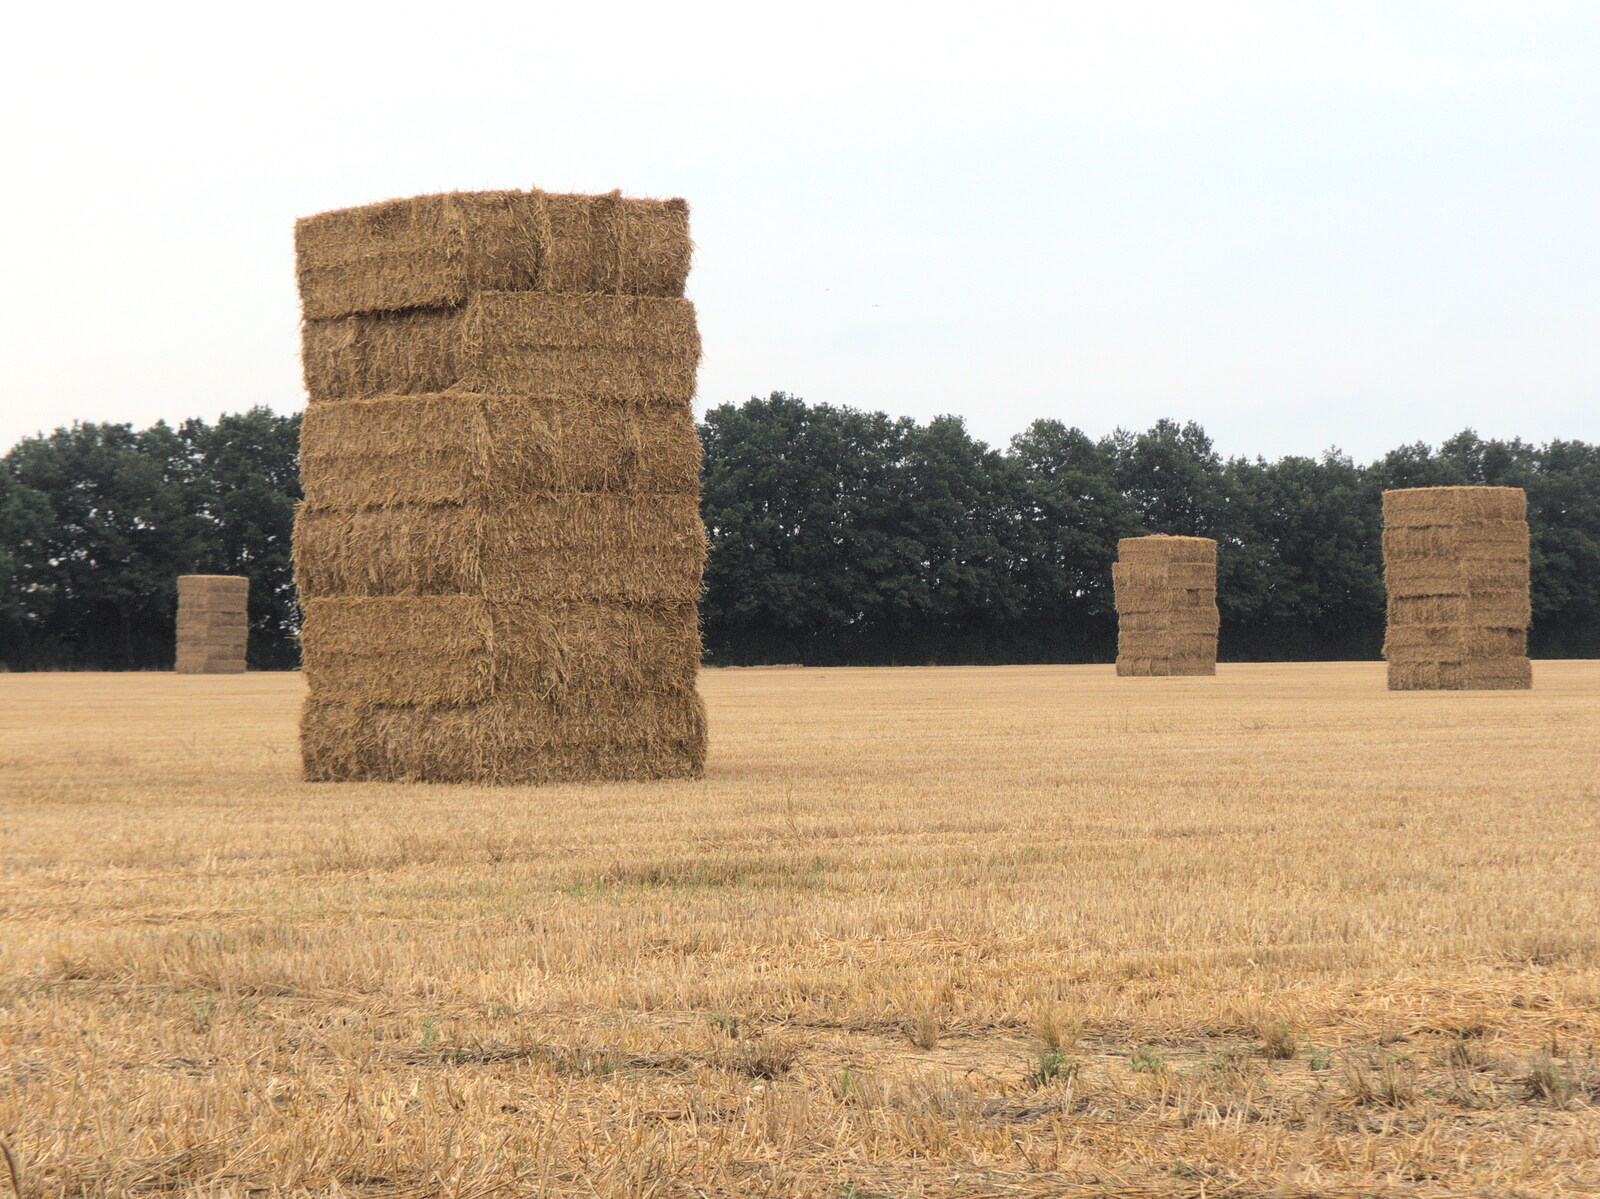 Piles of hay bales out at Thrandeston from The Brome and Oakley Fête, Oakley Hall, Suffolk - 19th September 2021